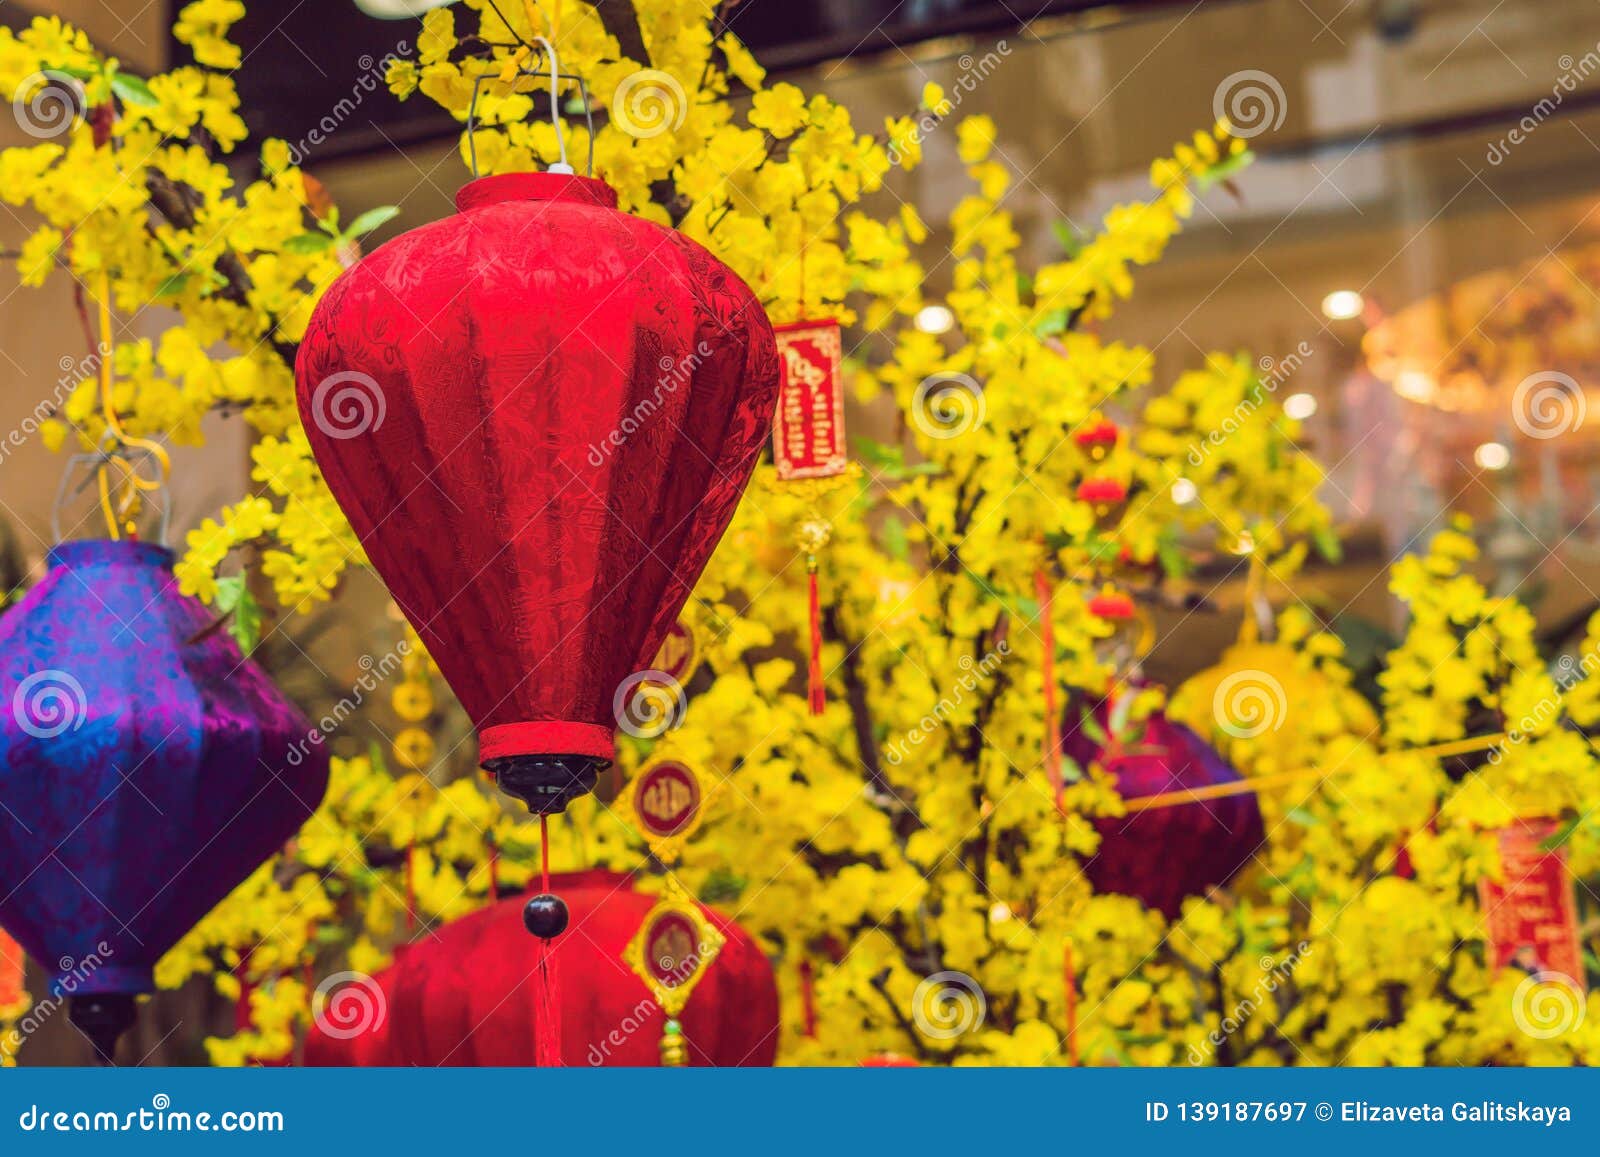 Yellow Flowers In Honor Of The Vietnamese New Year Lunar New Year Flower Market Chinese New Year Tet Stock Image Image Of Fair Background